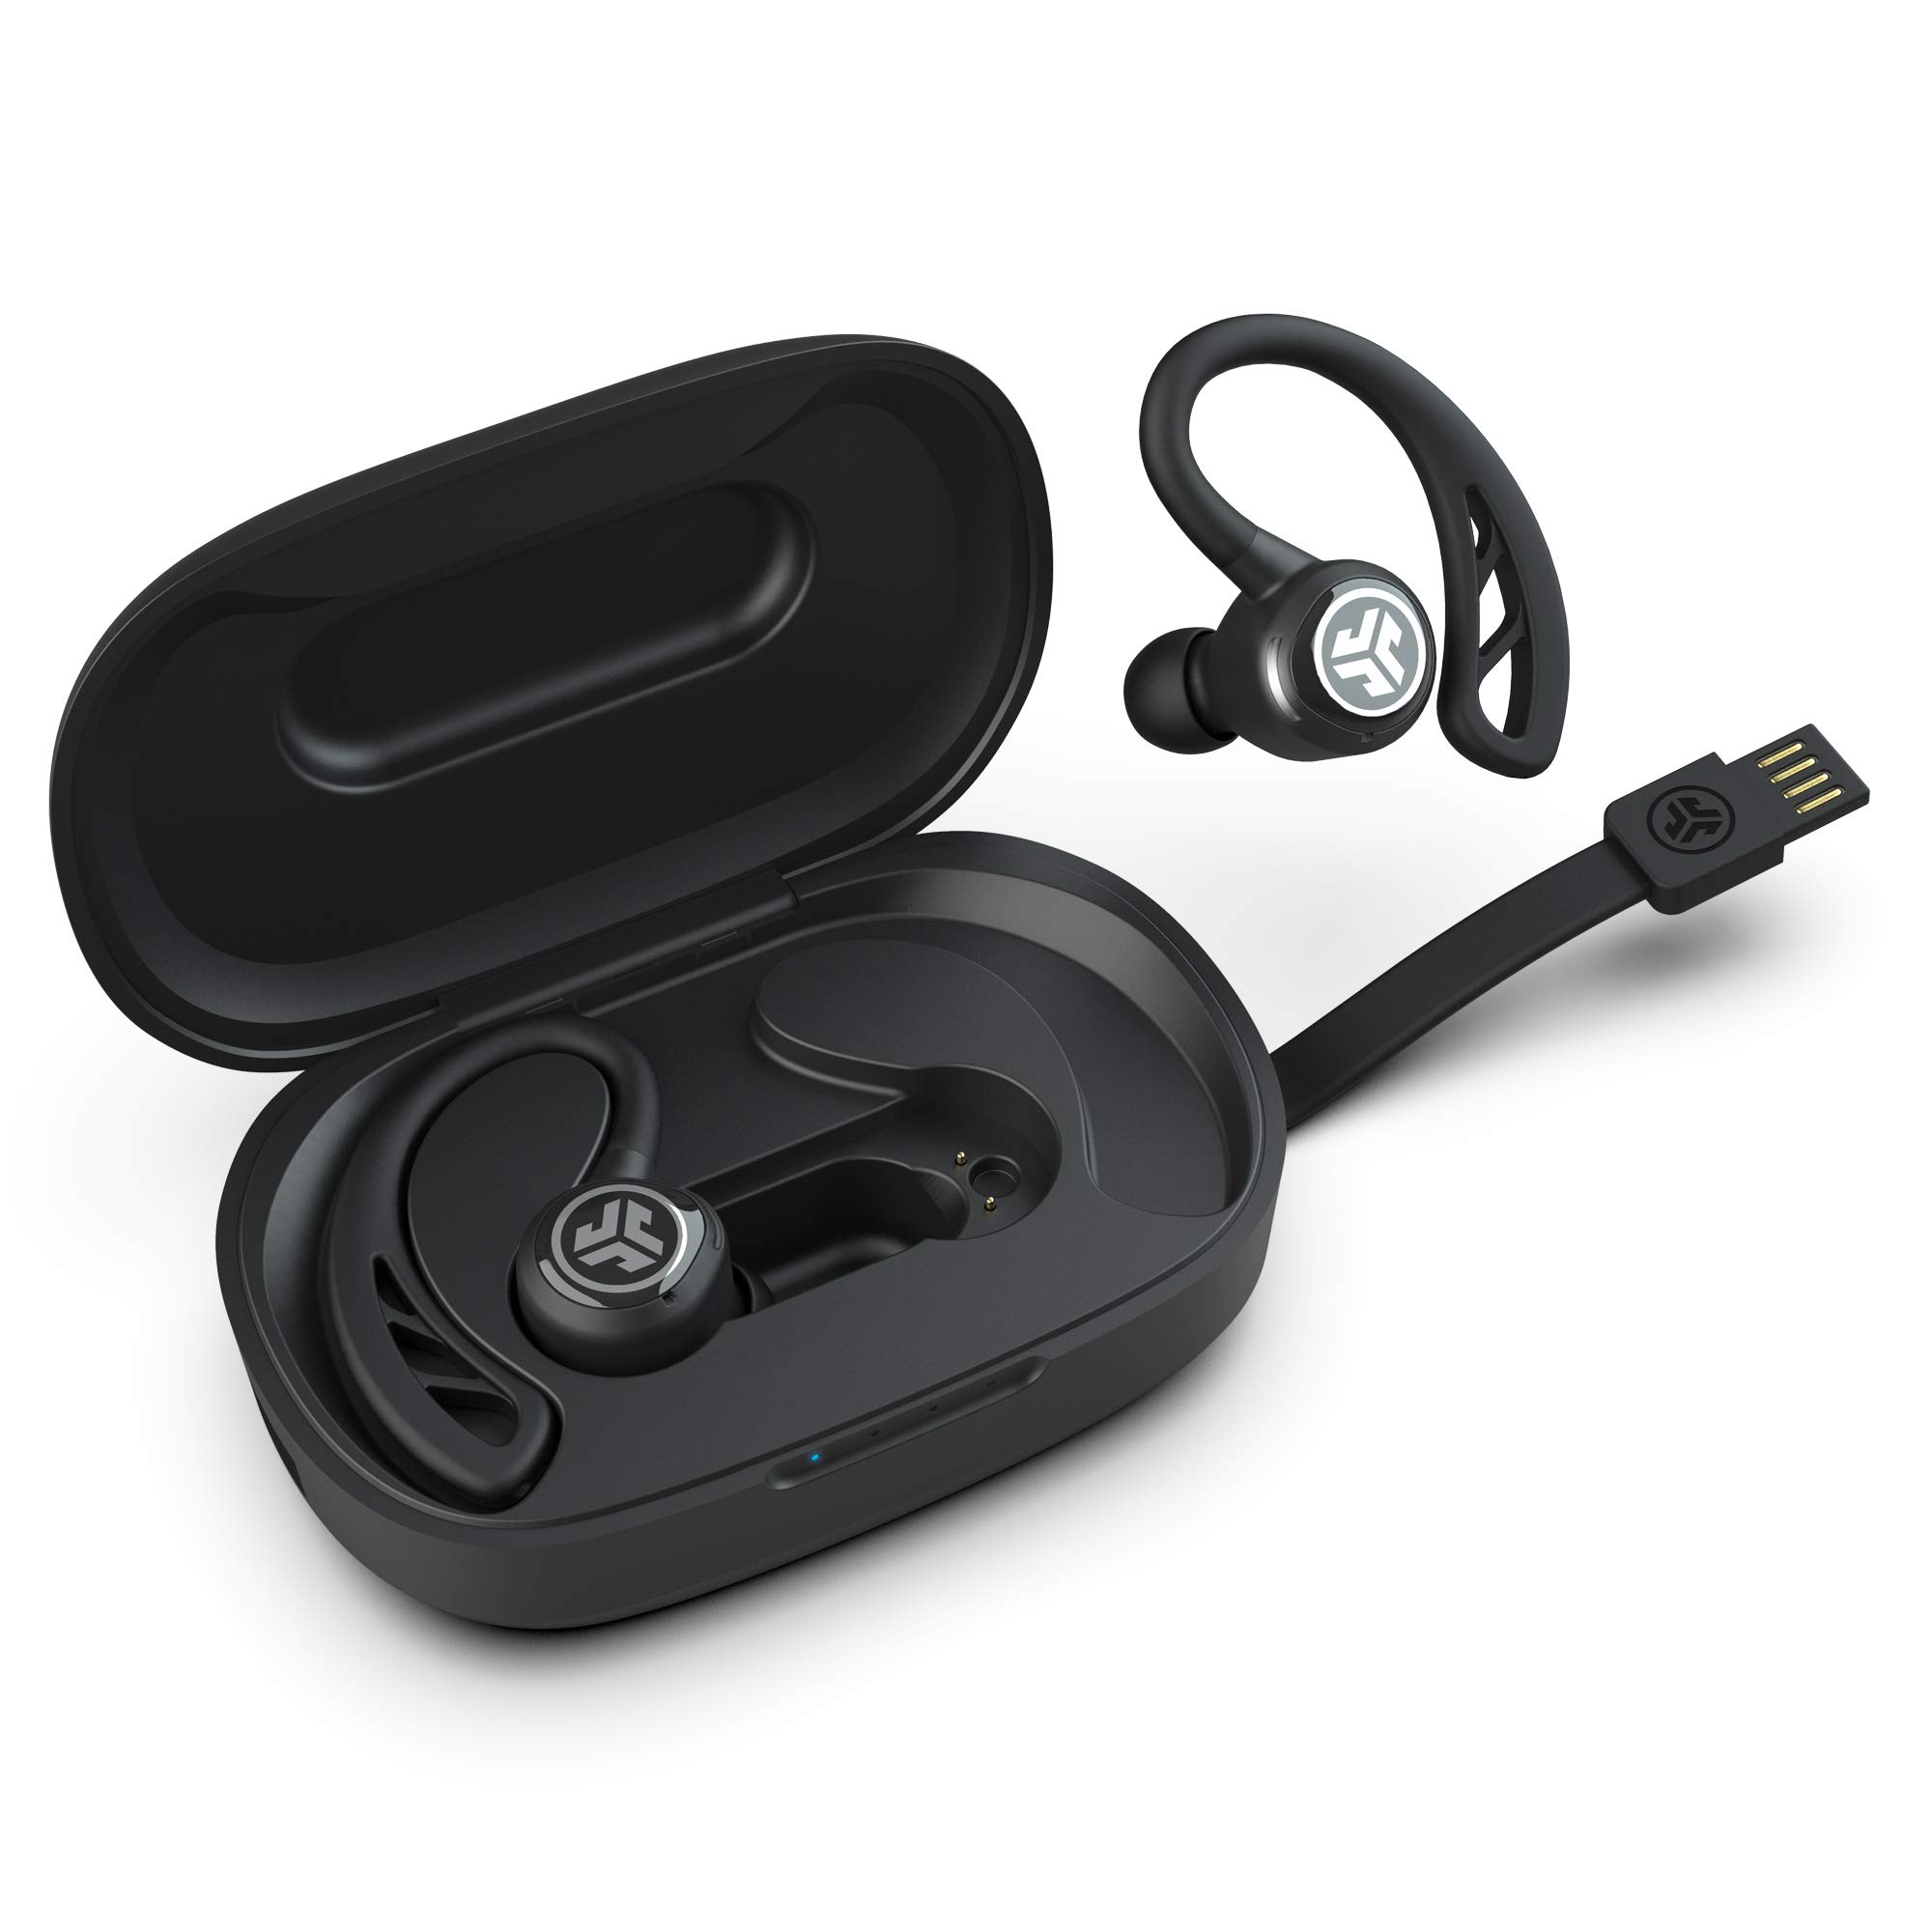 Charging JLab Wireless Earbuds: A Quick Guide